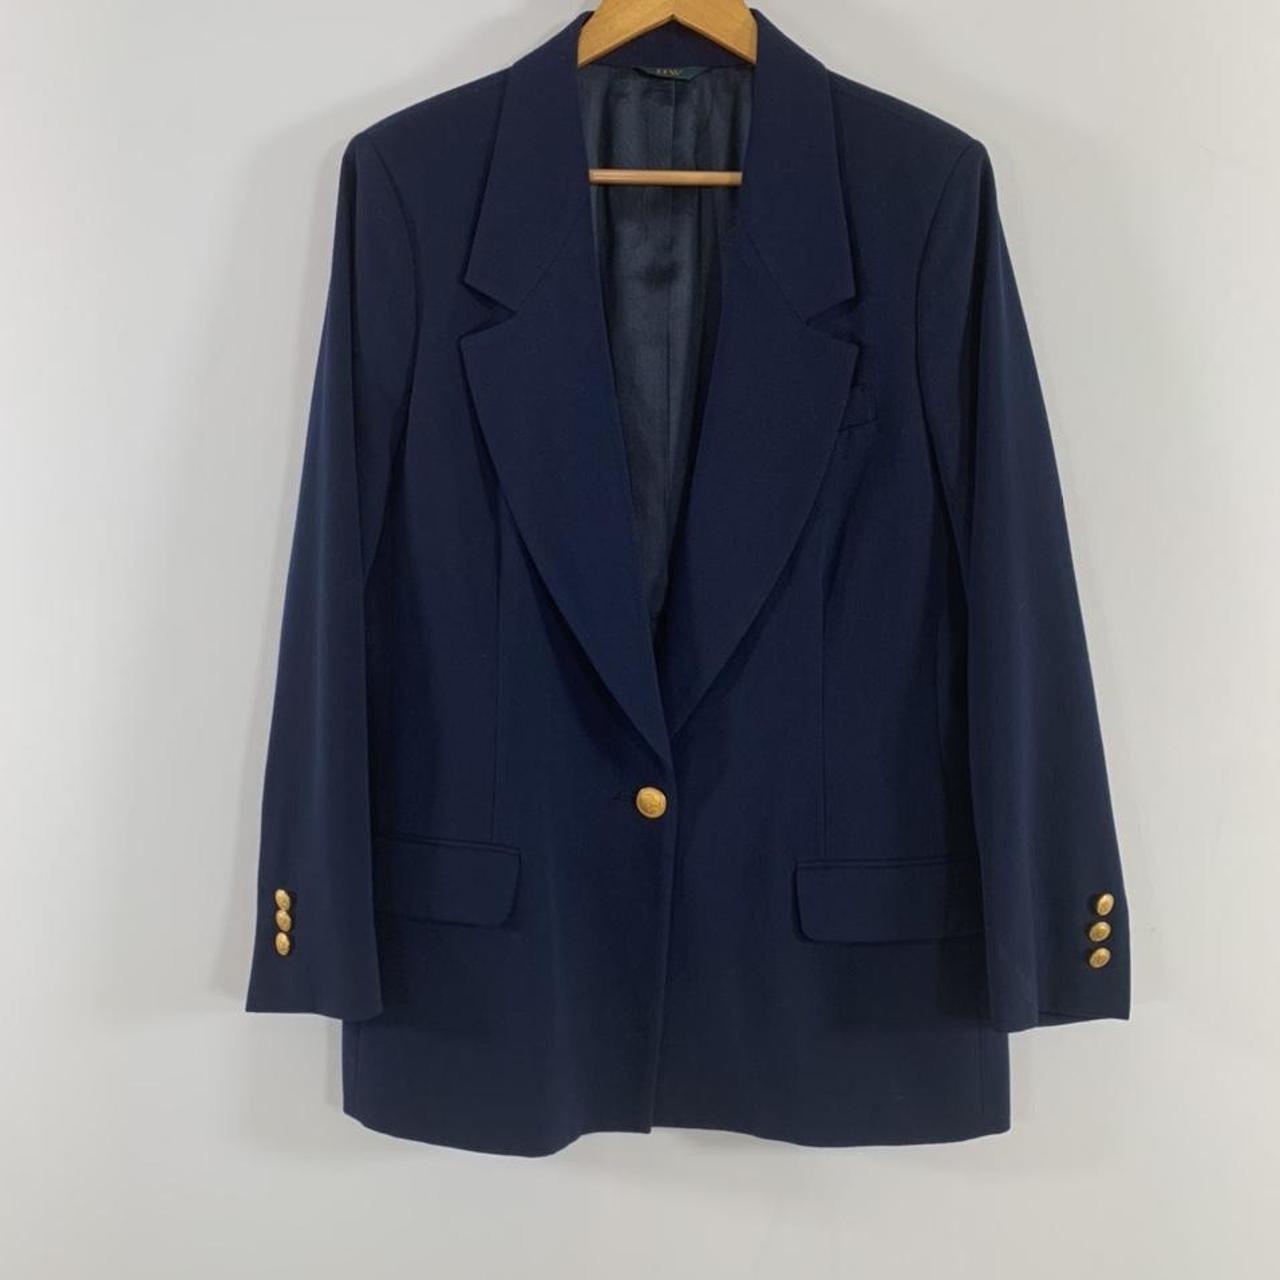 Hawke & Co. Women's Red and Blue Tailored-jackets (4)